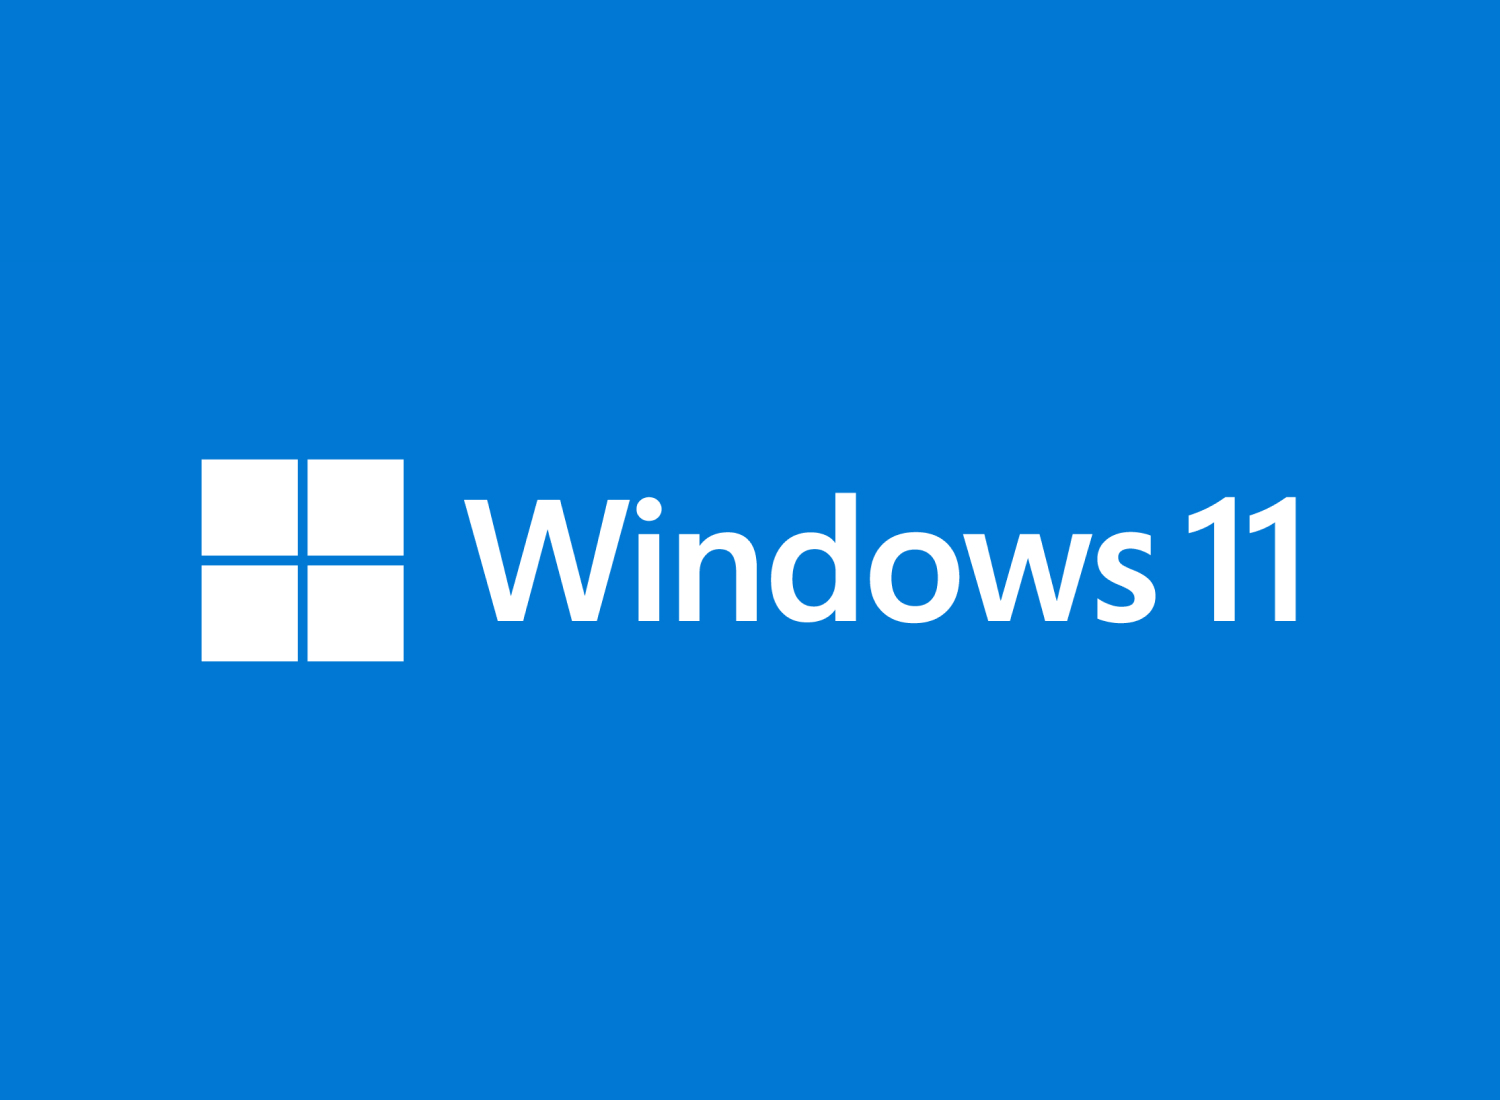 Get to know Windows 11 Widgets with these 11 faves